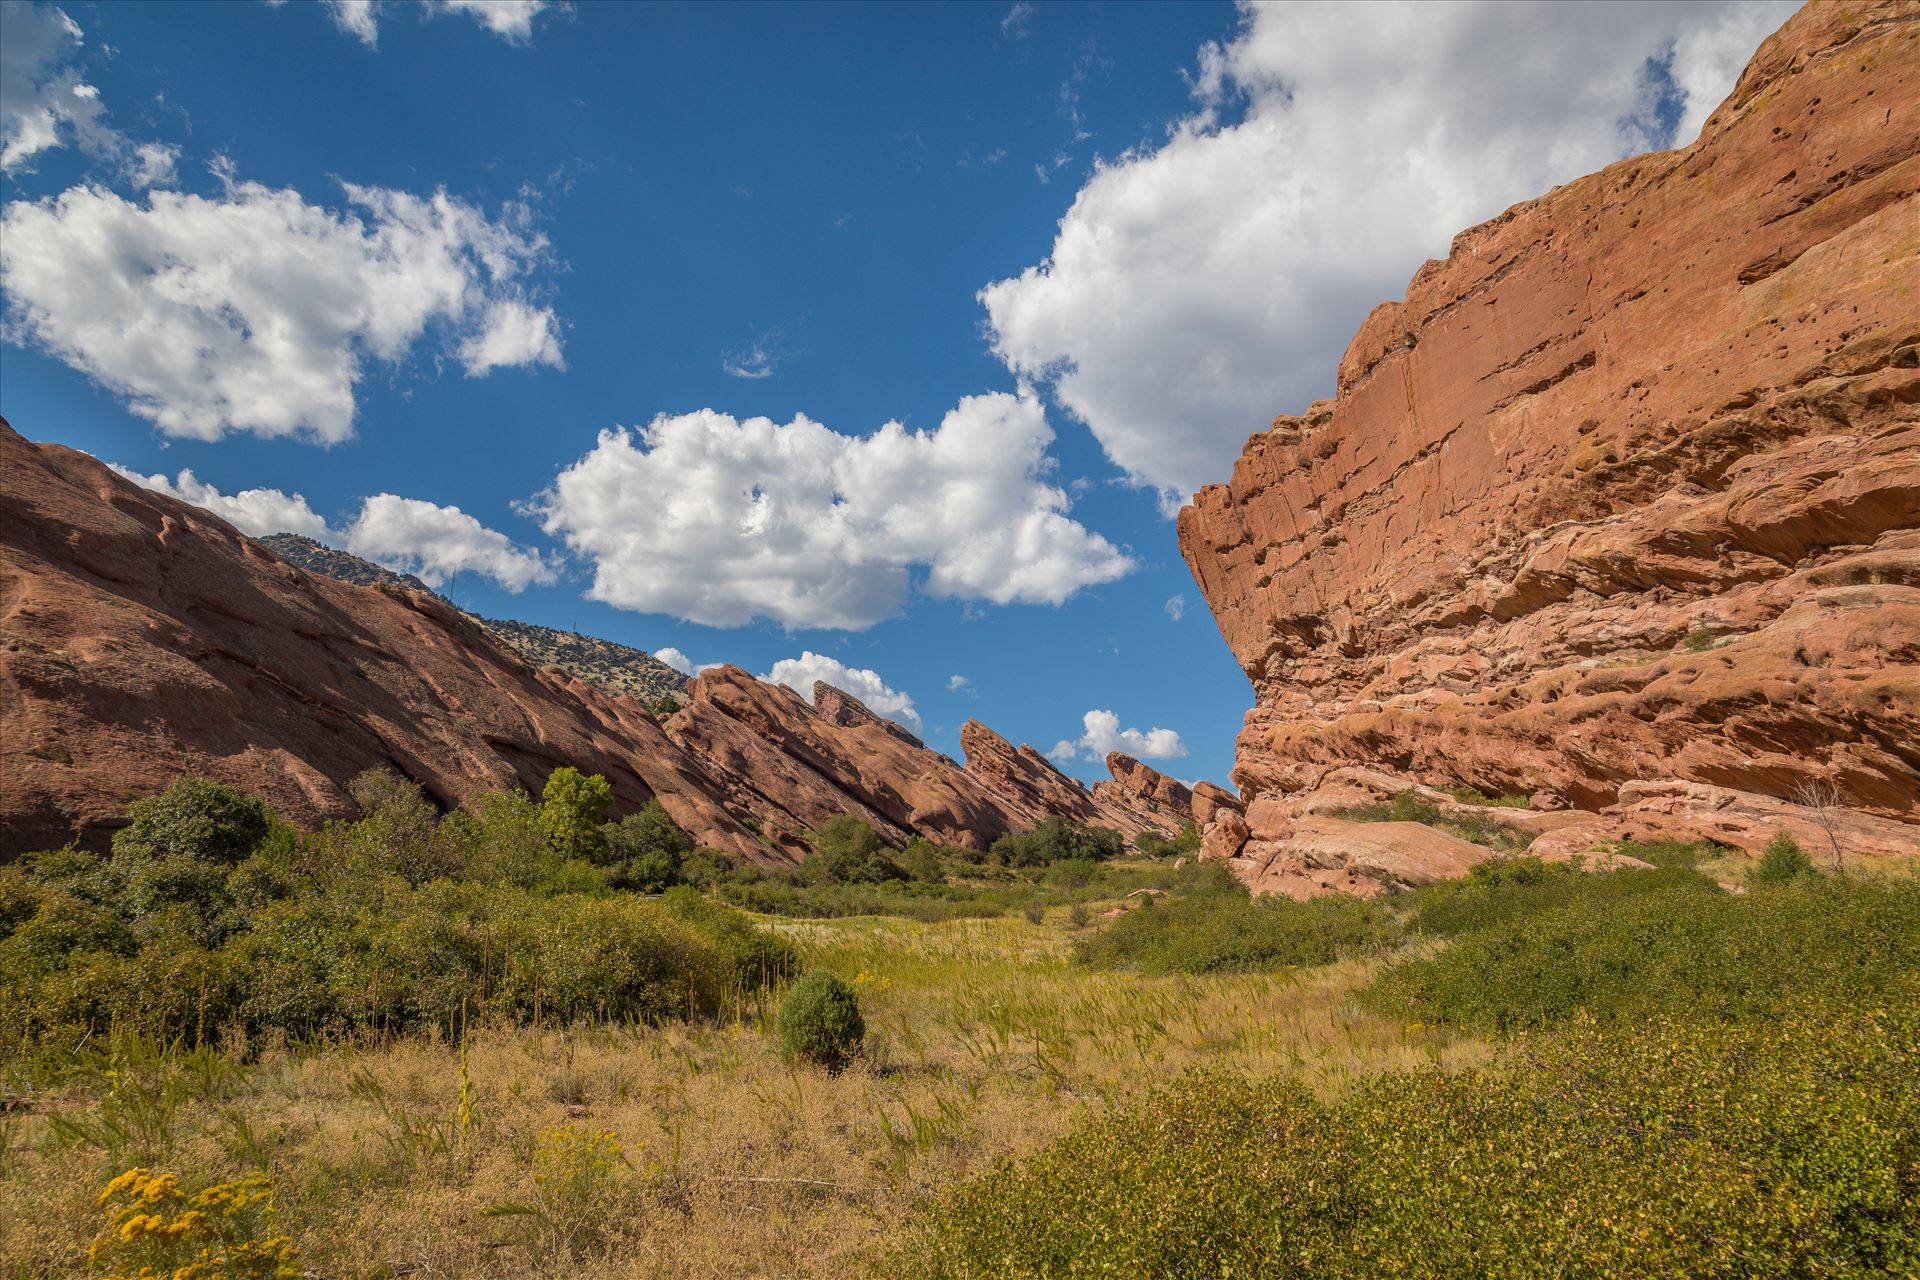 Red Rocks - Shipwreck Trail - From Shipwreck Trail at Red Rocks Park and Amphitheater, Morrison, Colorado. by Scott Smith Photos